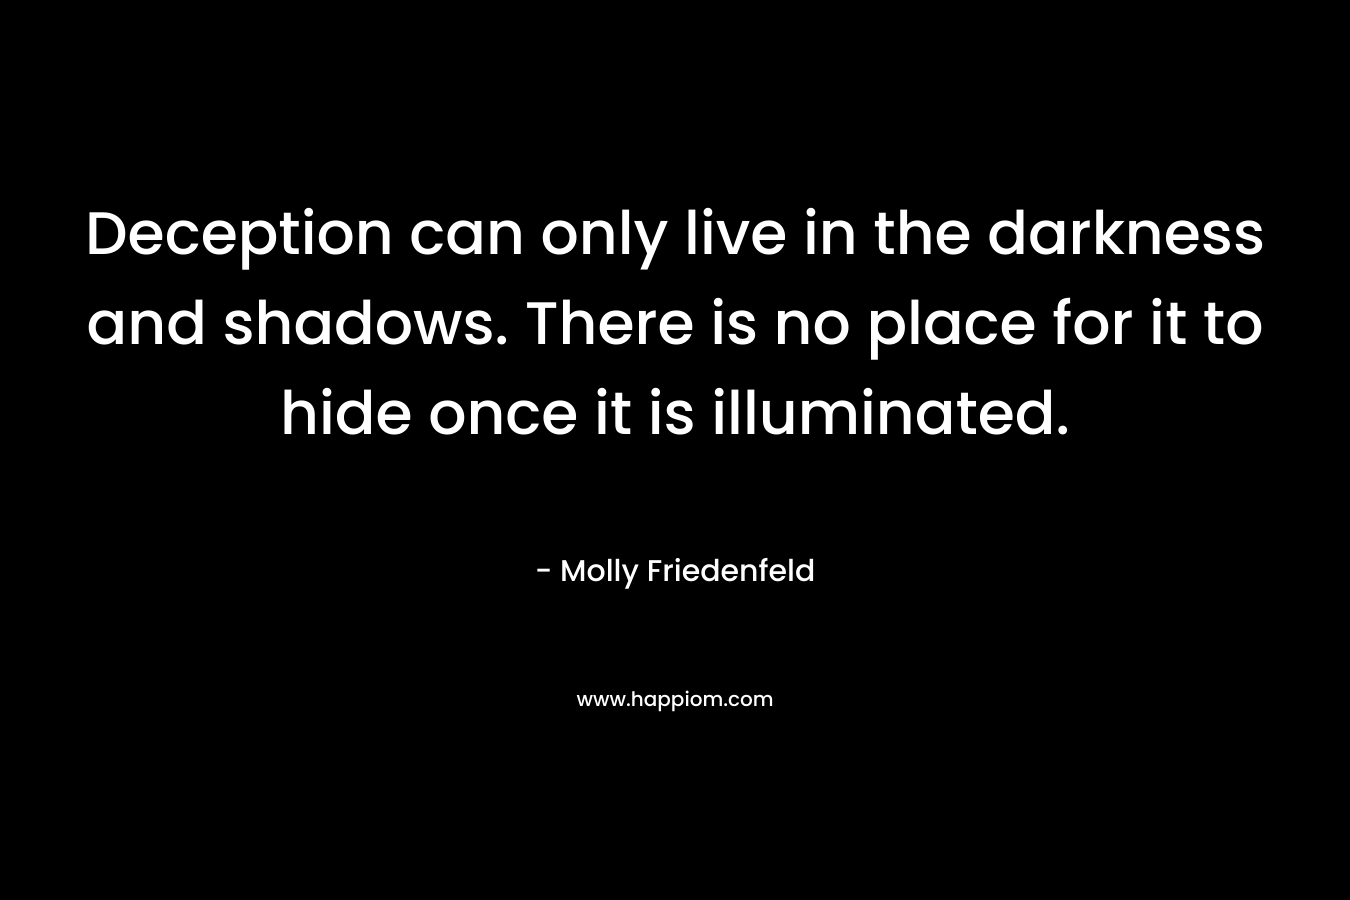 Deception can only live in the darkness and shadows. There is no place for it to hide once it is illuminated. – Molly Friedenfeld